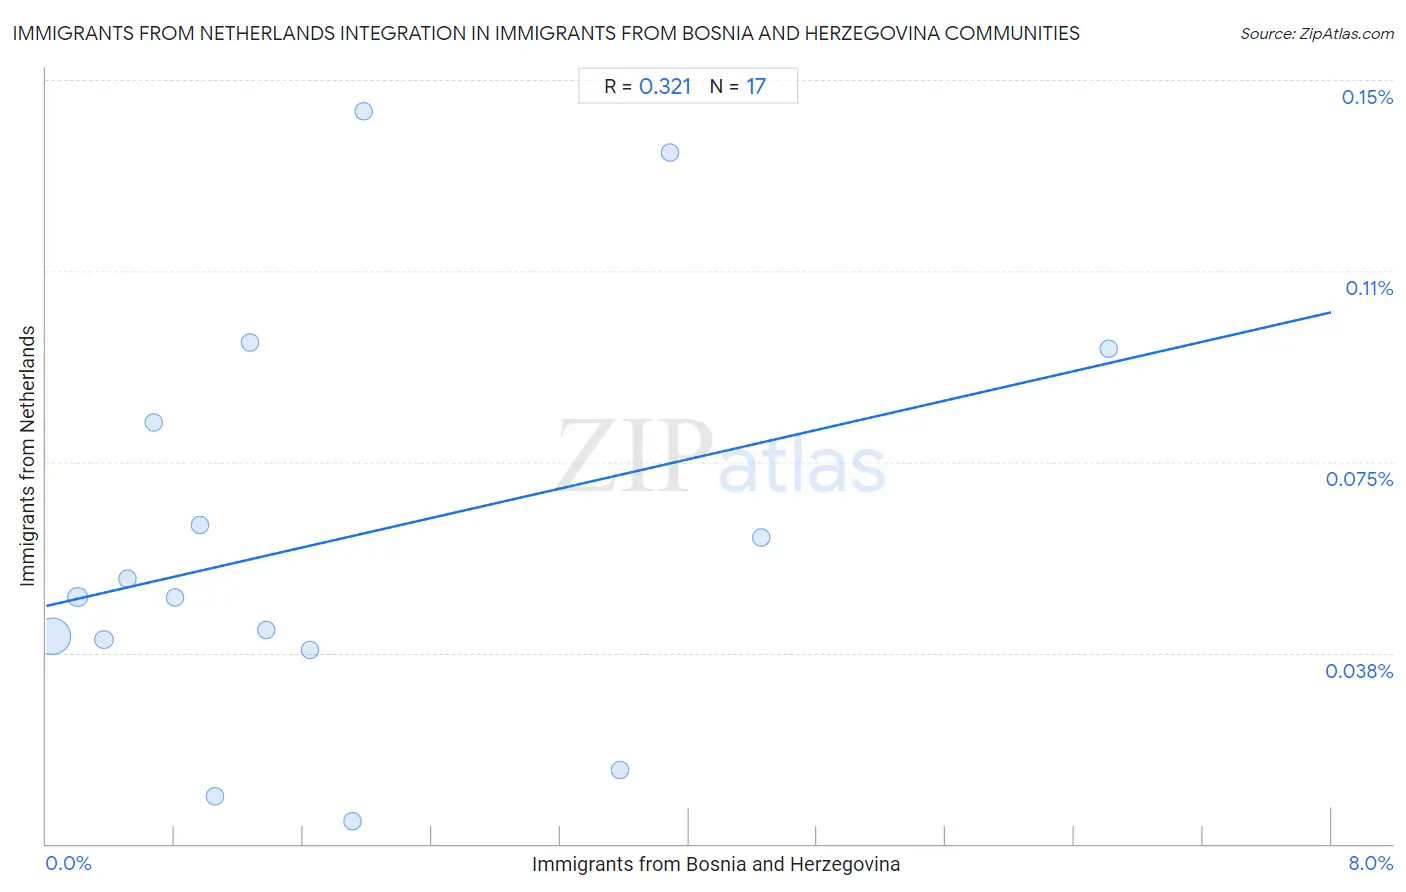 Immigrants from Bosnia and Herzegovina Integration in Immigrants from Netherlands Communities